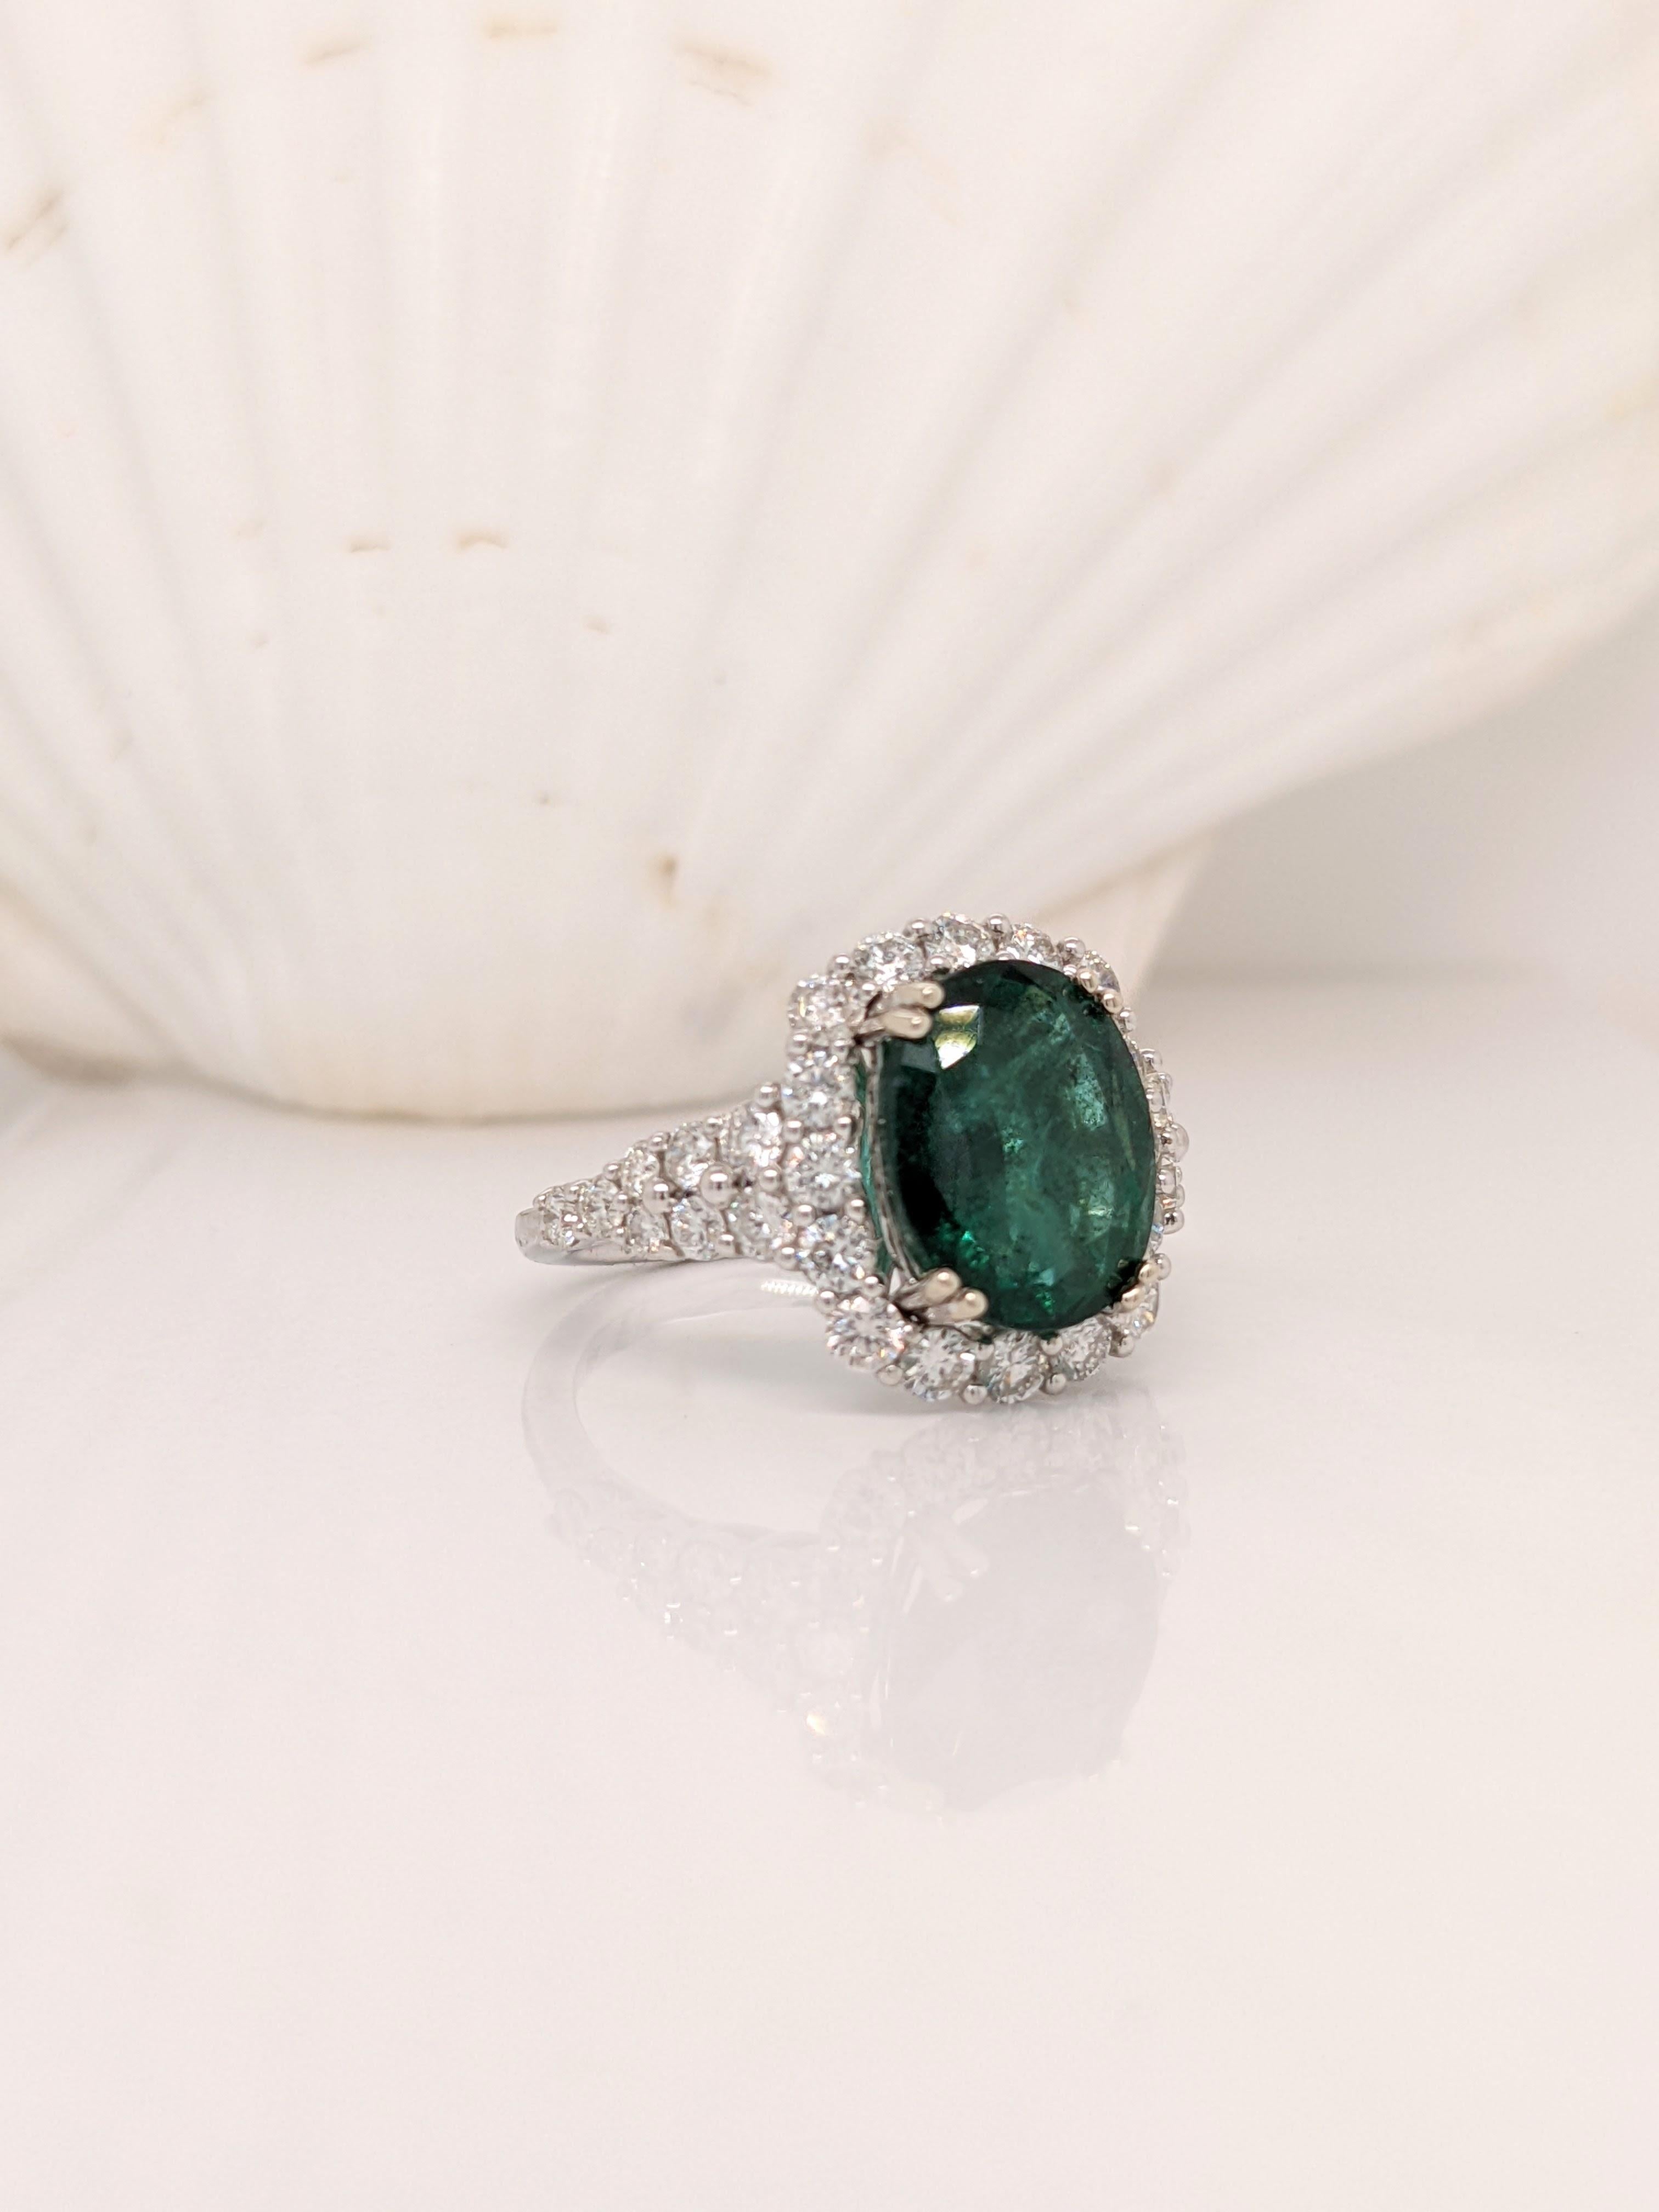 Center Stone: Emerald
Stone Weight: 3.0cts
Treatment: Oiled
Shape: Oval
Cut: Faceted
Size: 11x9mm
Metal: 14K/4.52gms
Diamonds S/I GH: 31/1.35cts
Sku: AJR188/8760

~~~~~~

As listed, this piece is ready to ship! If you would like to use your own